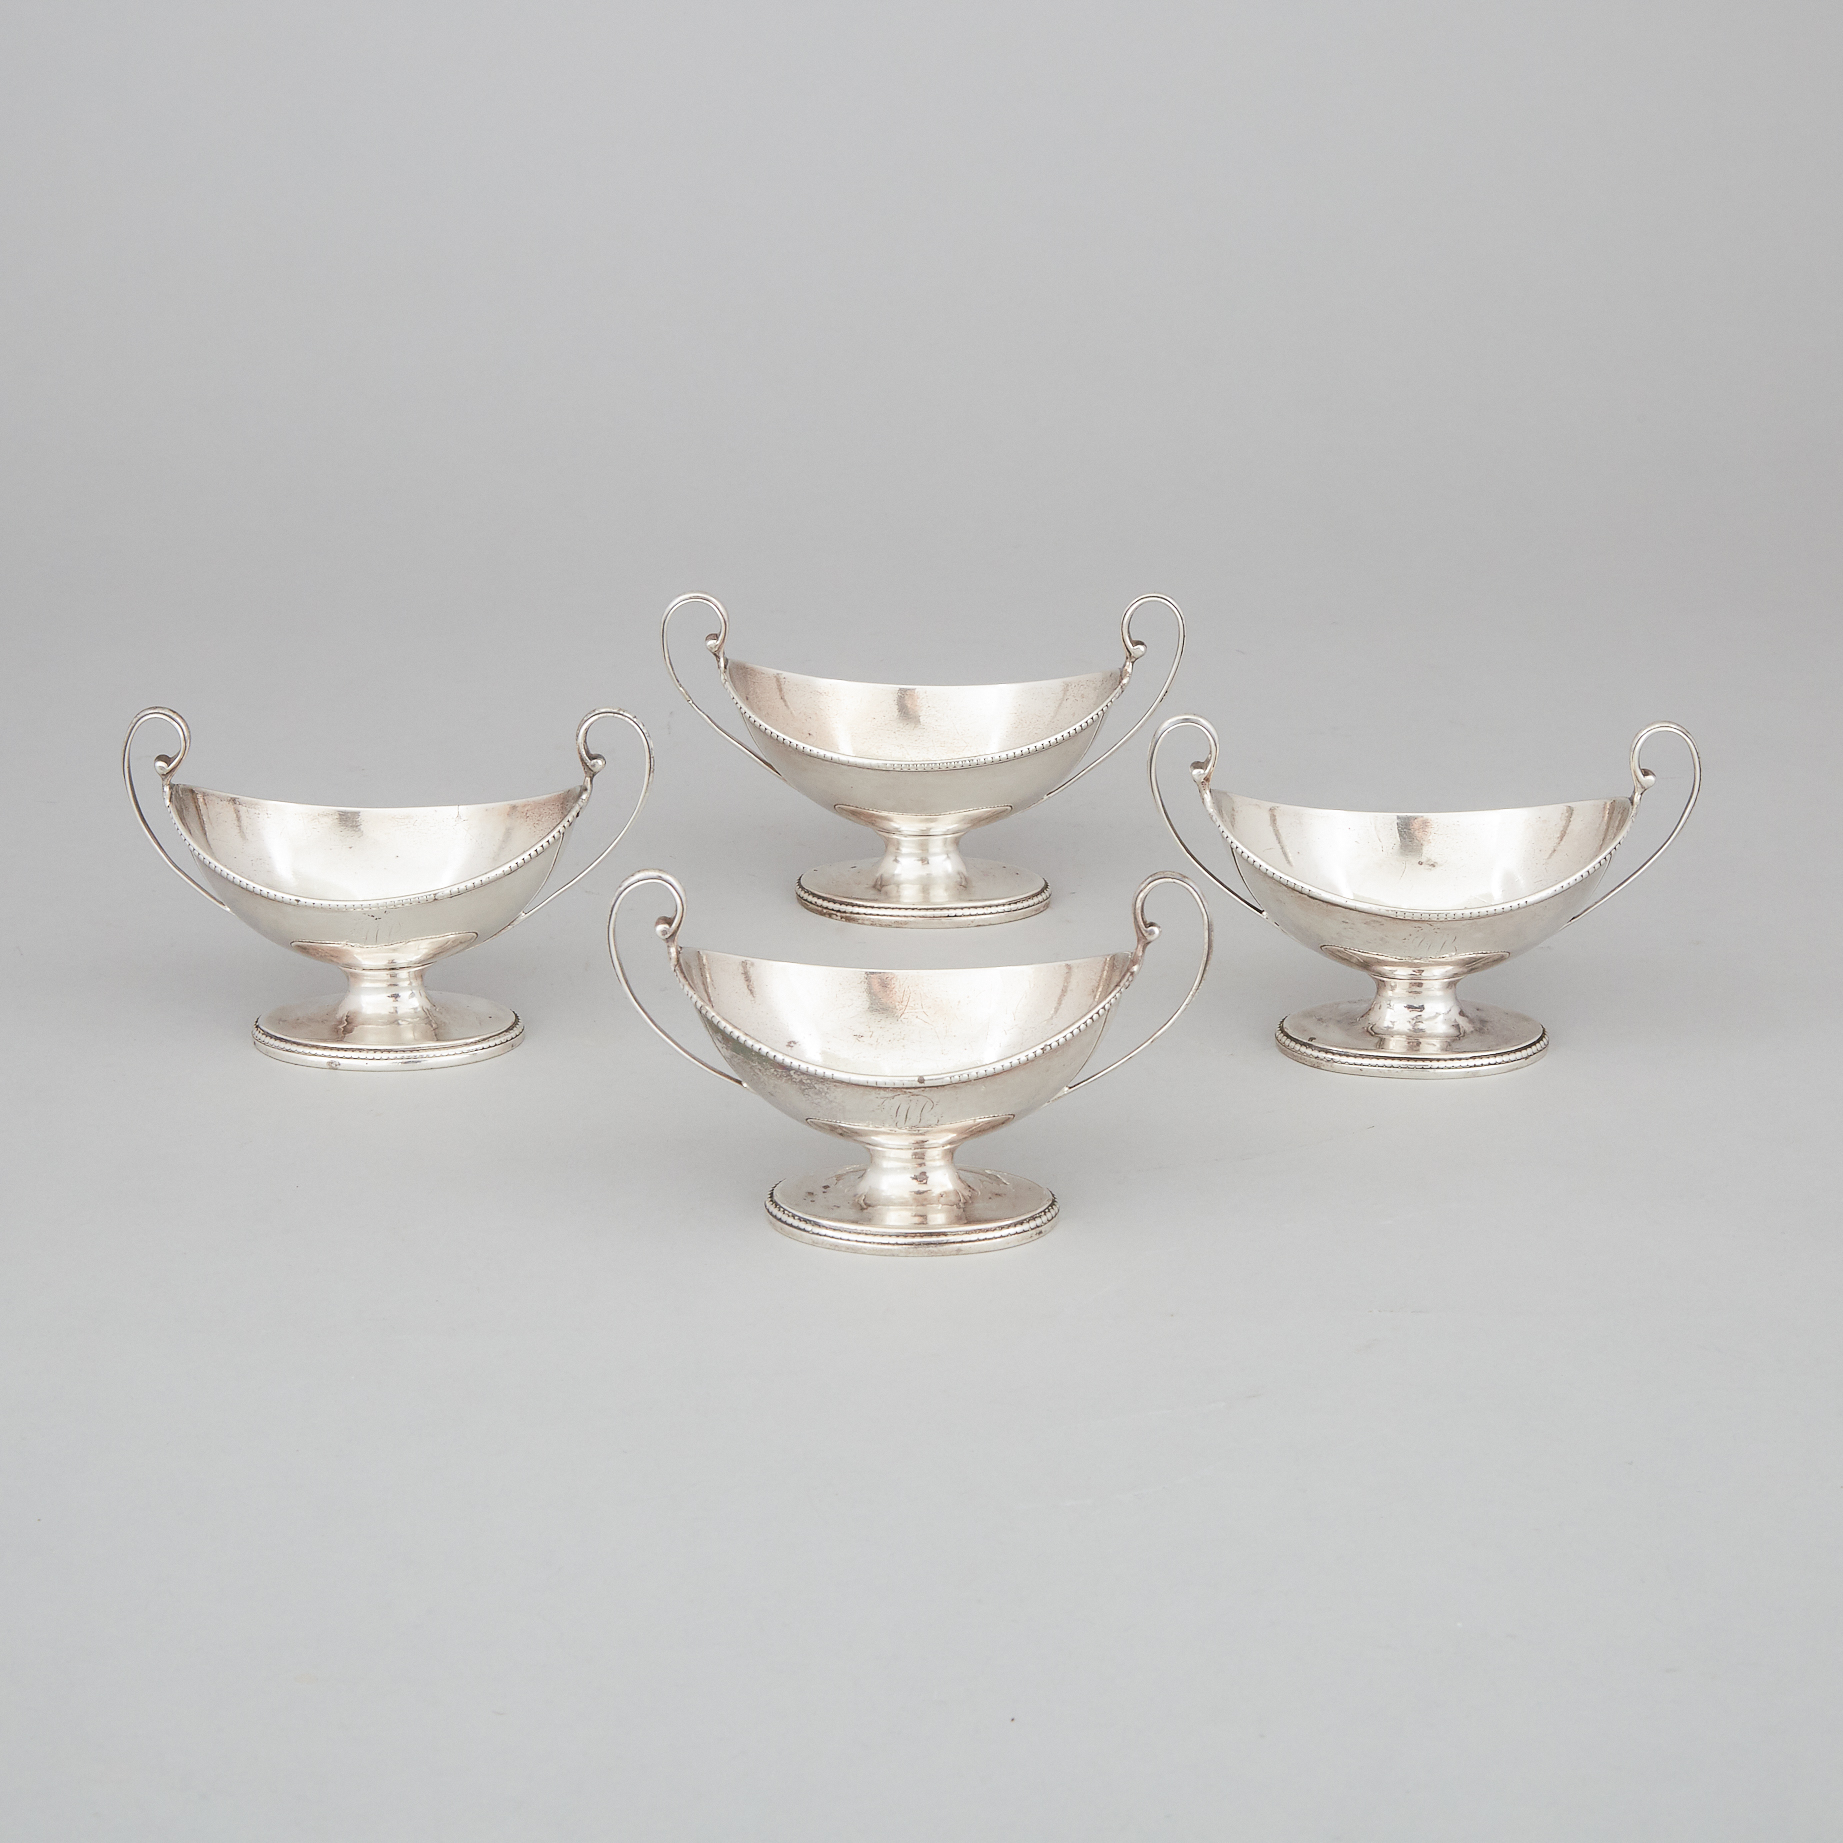 Set of Four George III Silver Oval Two-Handled Salt Cellars, Robert Hennell I, London, 1784